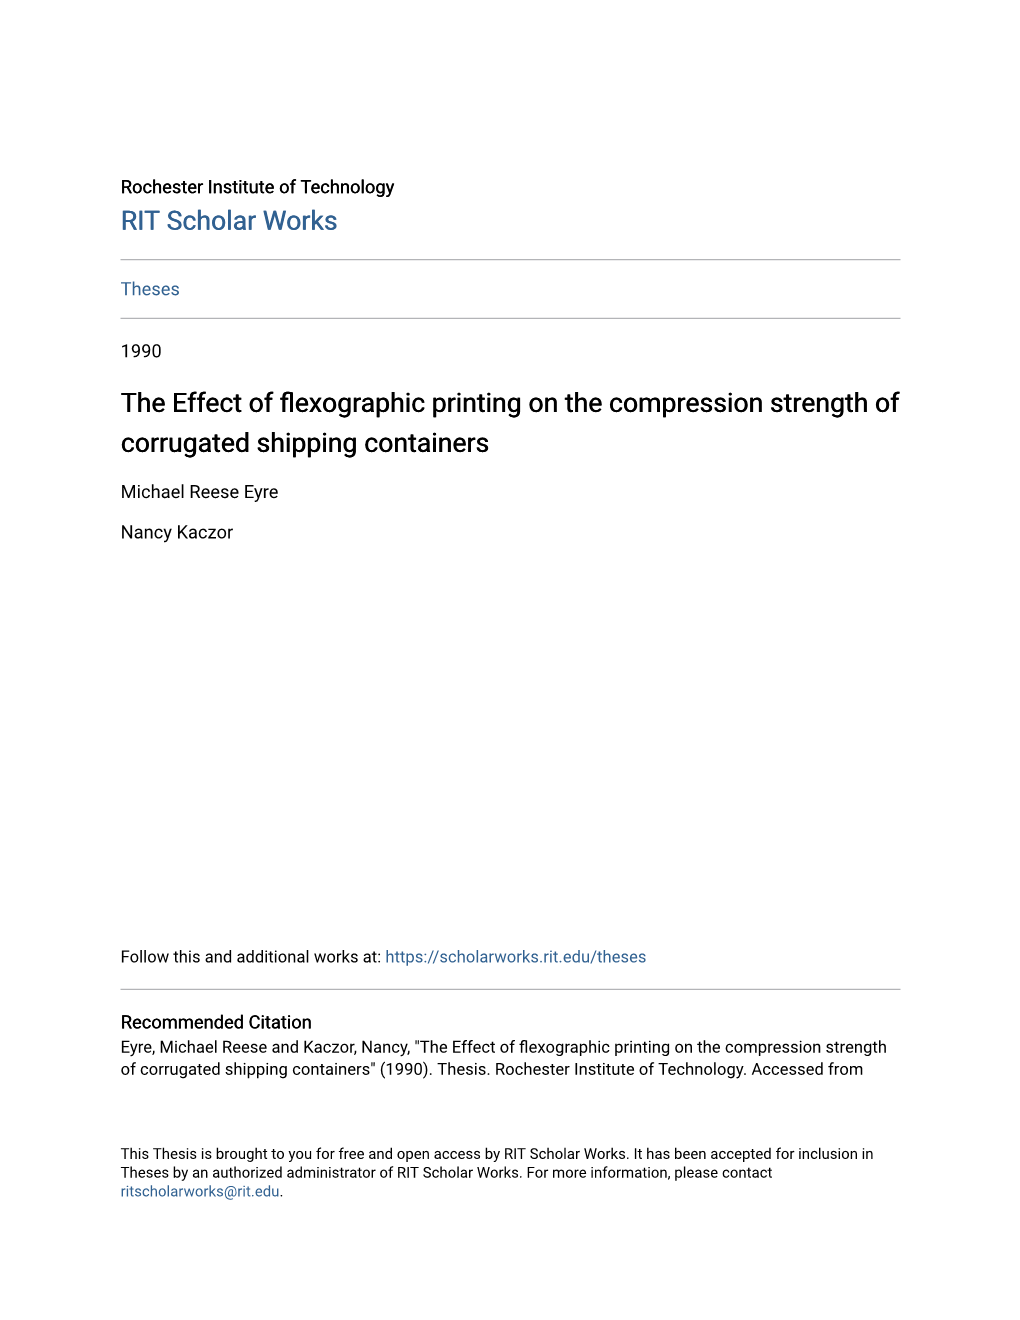 The Effect of Flexographic Printing on the Compression Strength of Corrugated Shipping Containers